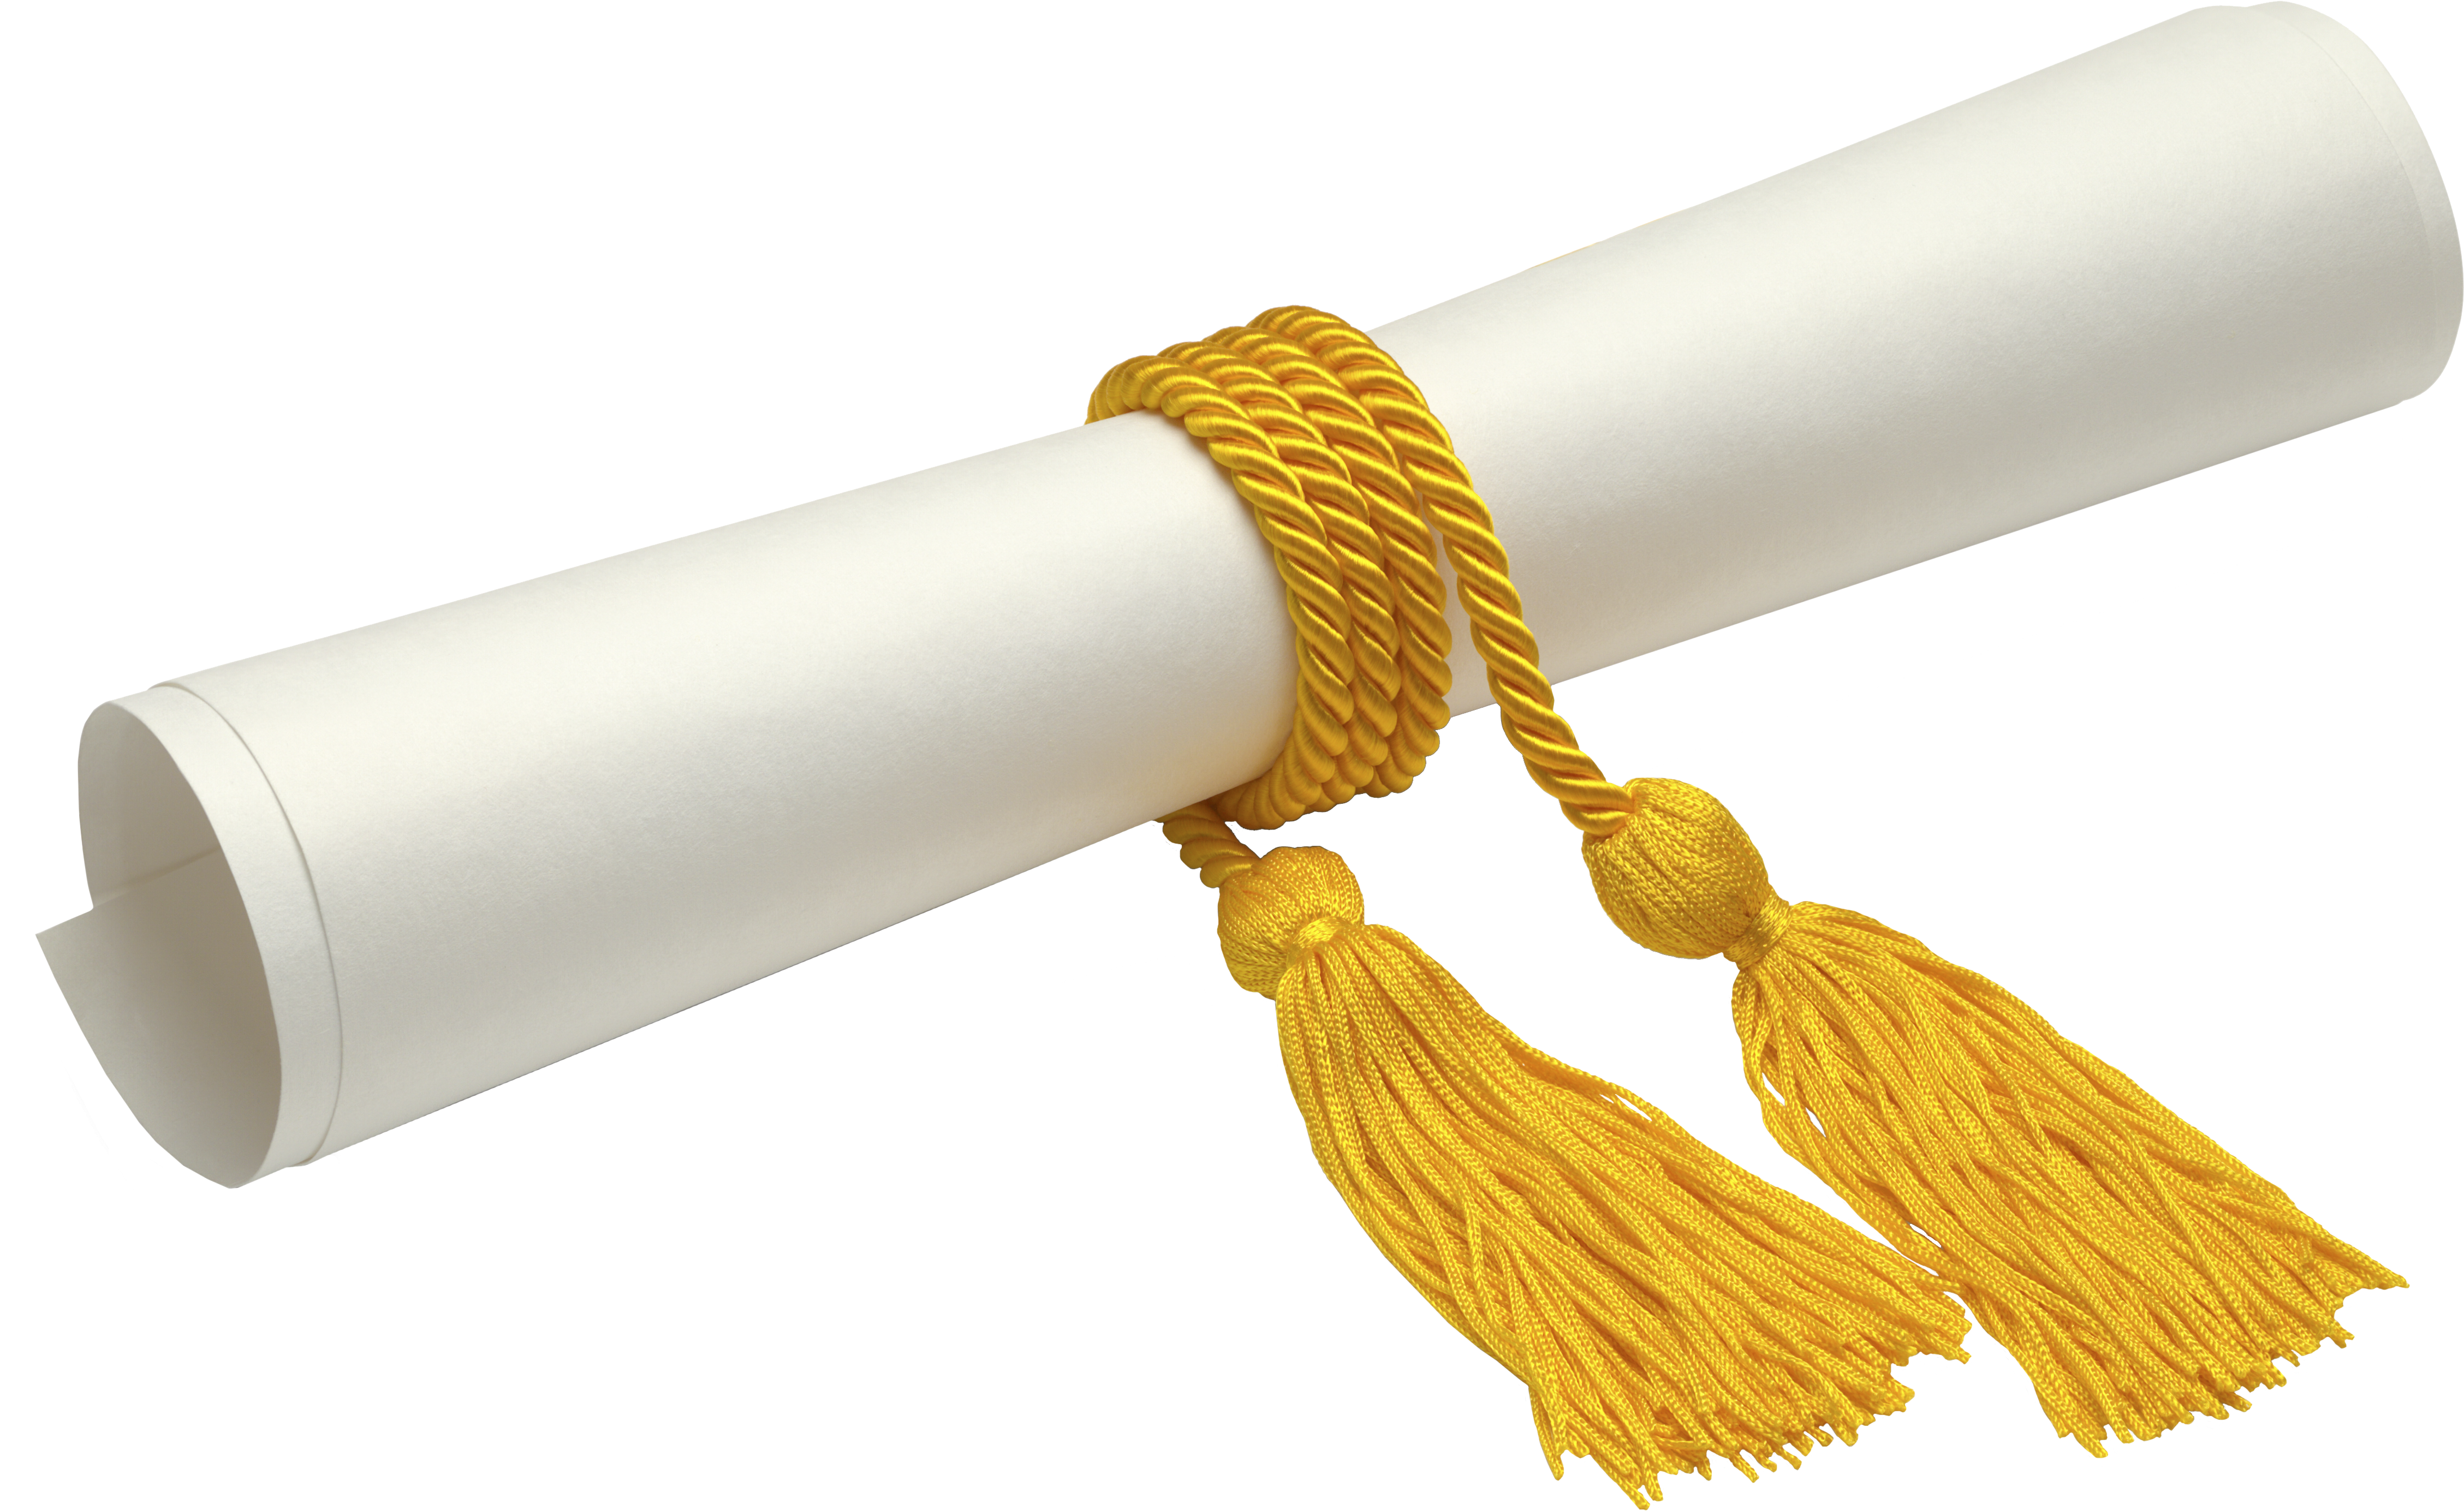 A Yellow Rope Tied To A Rolled Up Paper